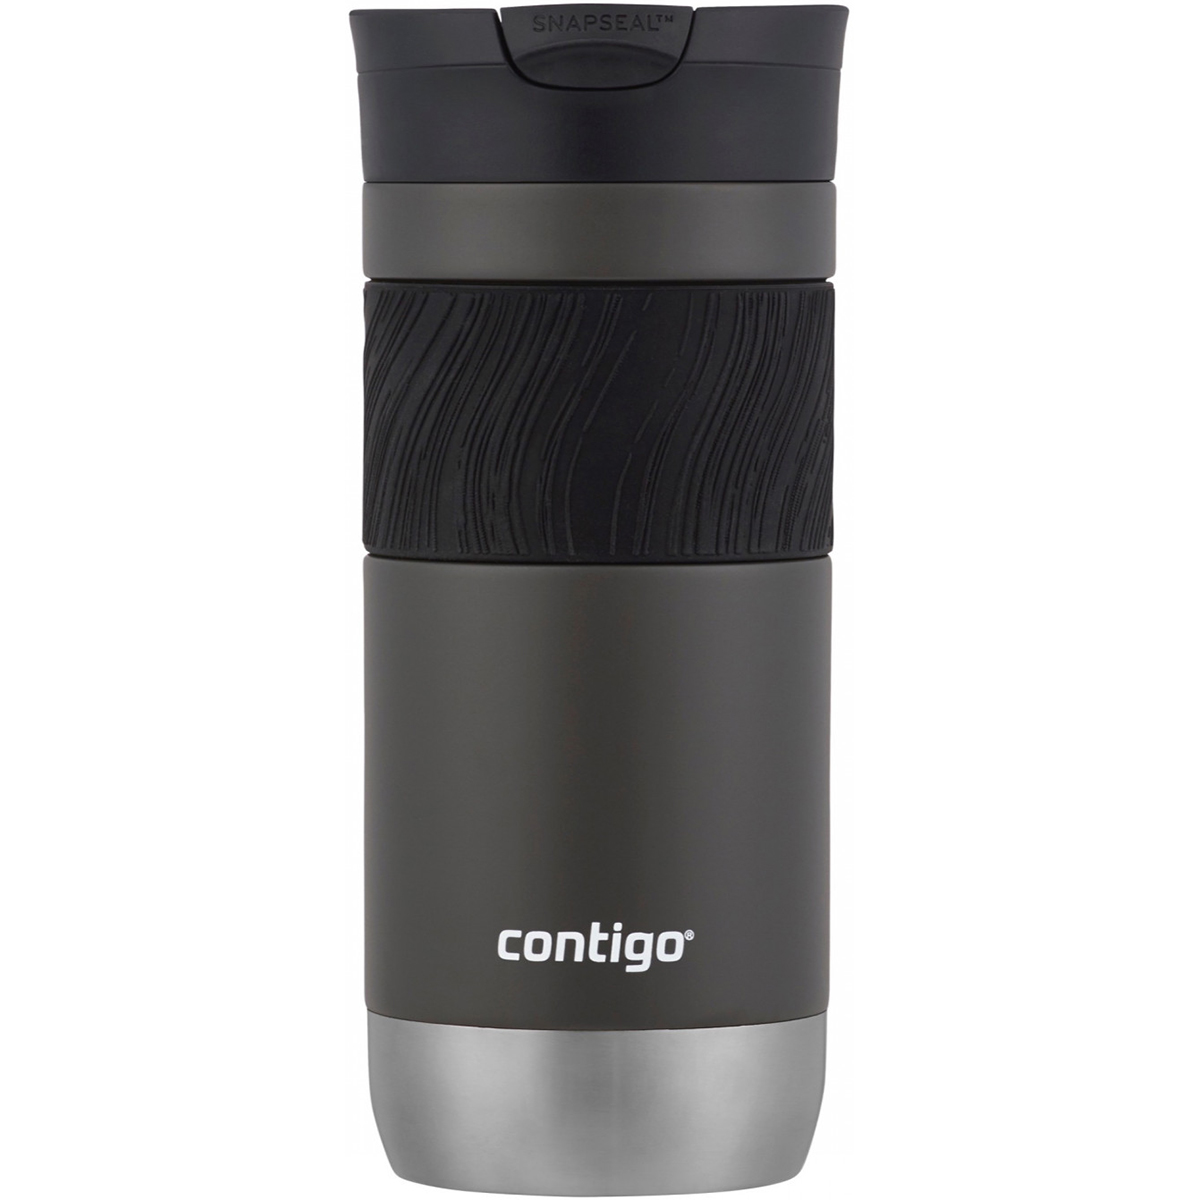 Contigo Byron 2.0 Stainless Steel Travel Mug with SNAPSEAL Lid and Grip Sake and Blue Corn, 16 fl oz., 2-Pack - image 4 of 11